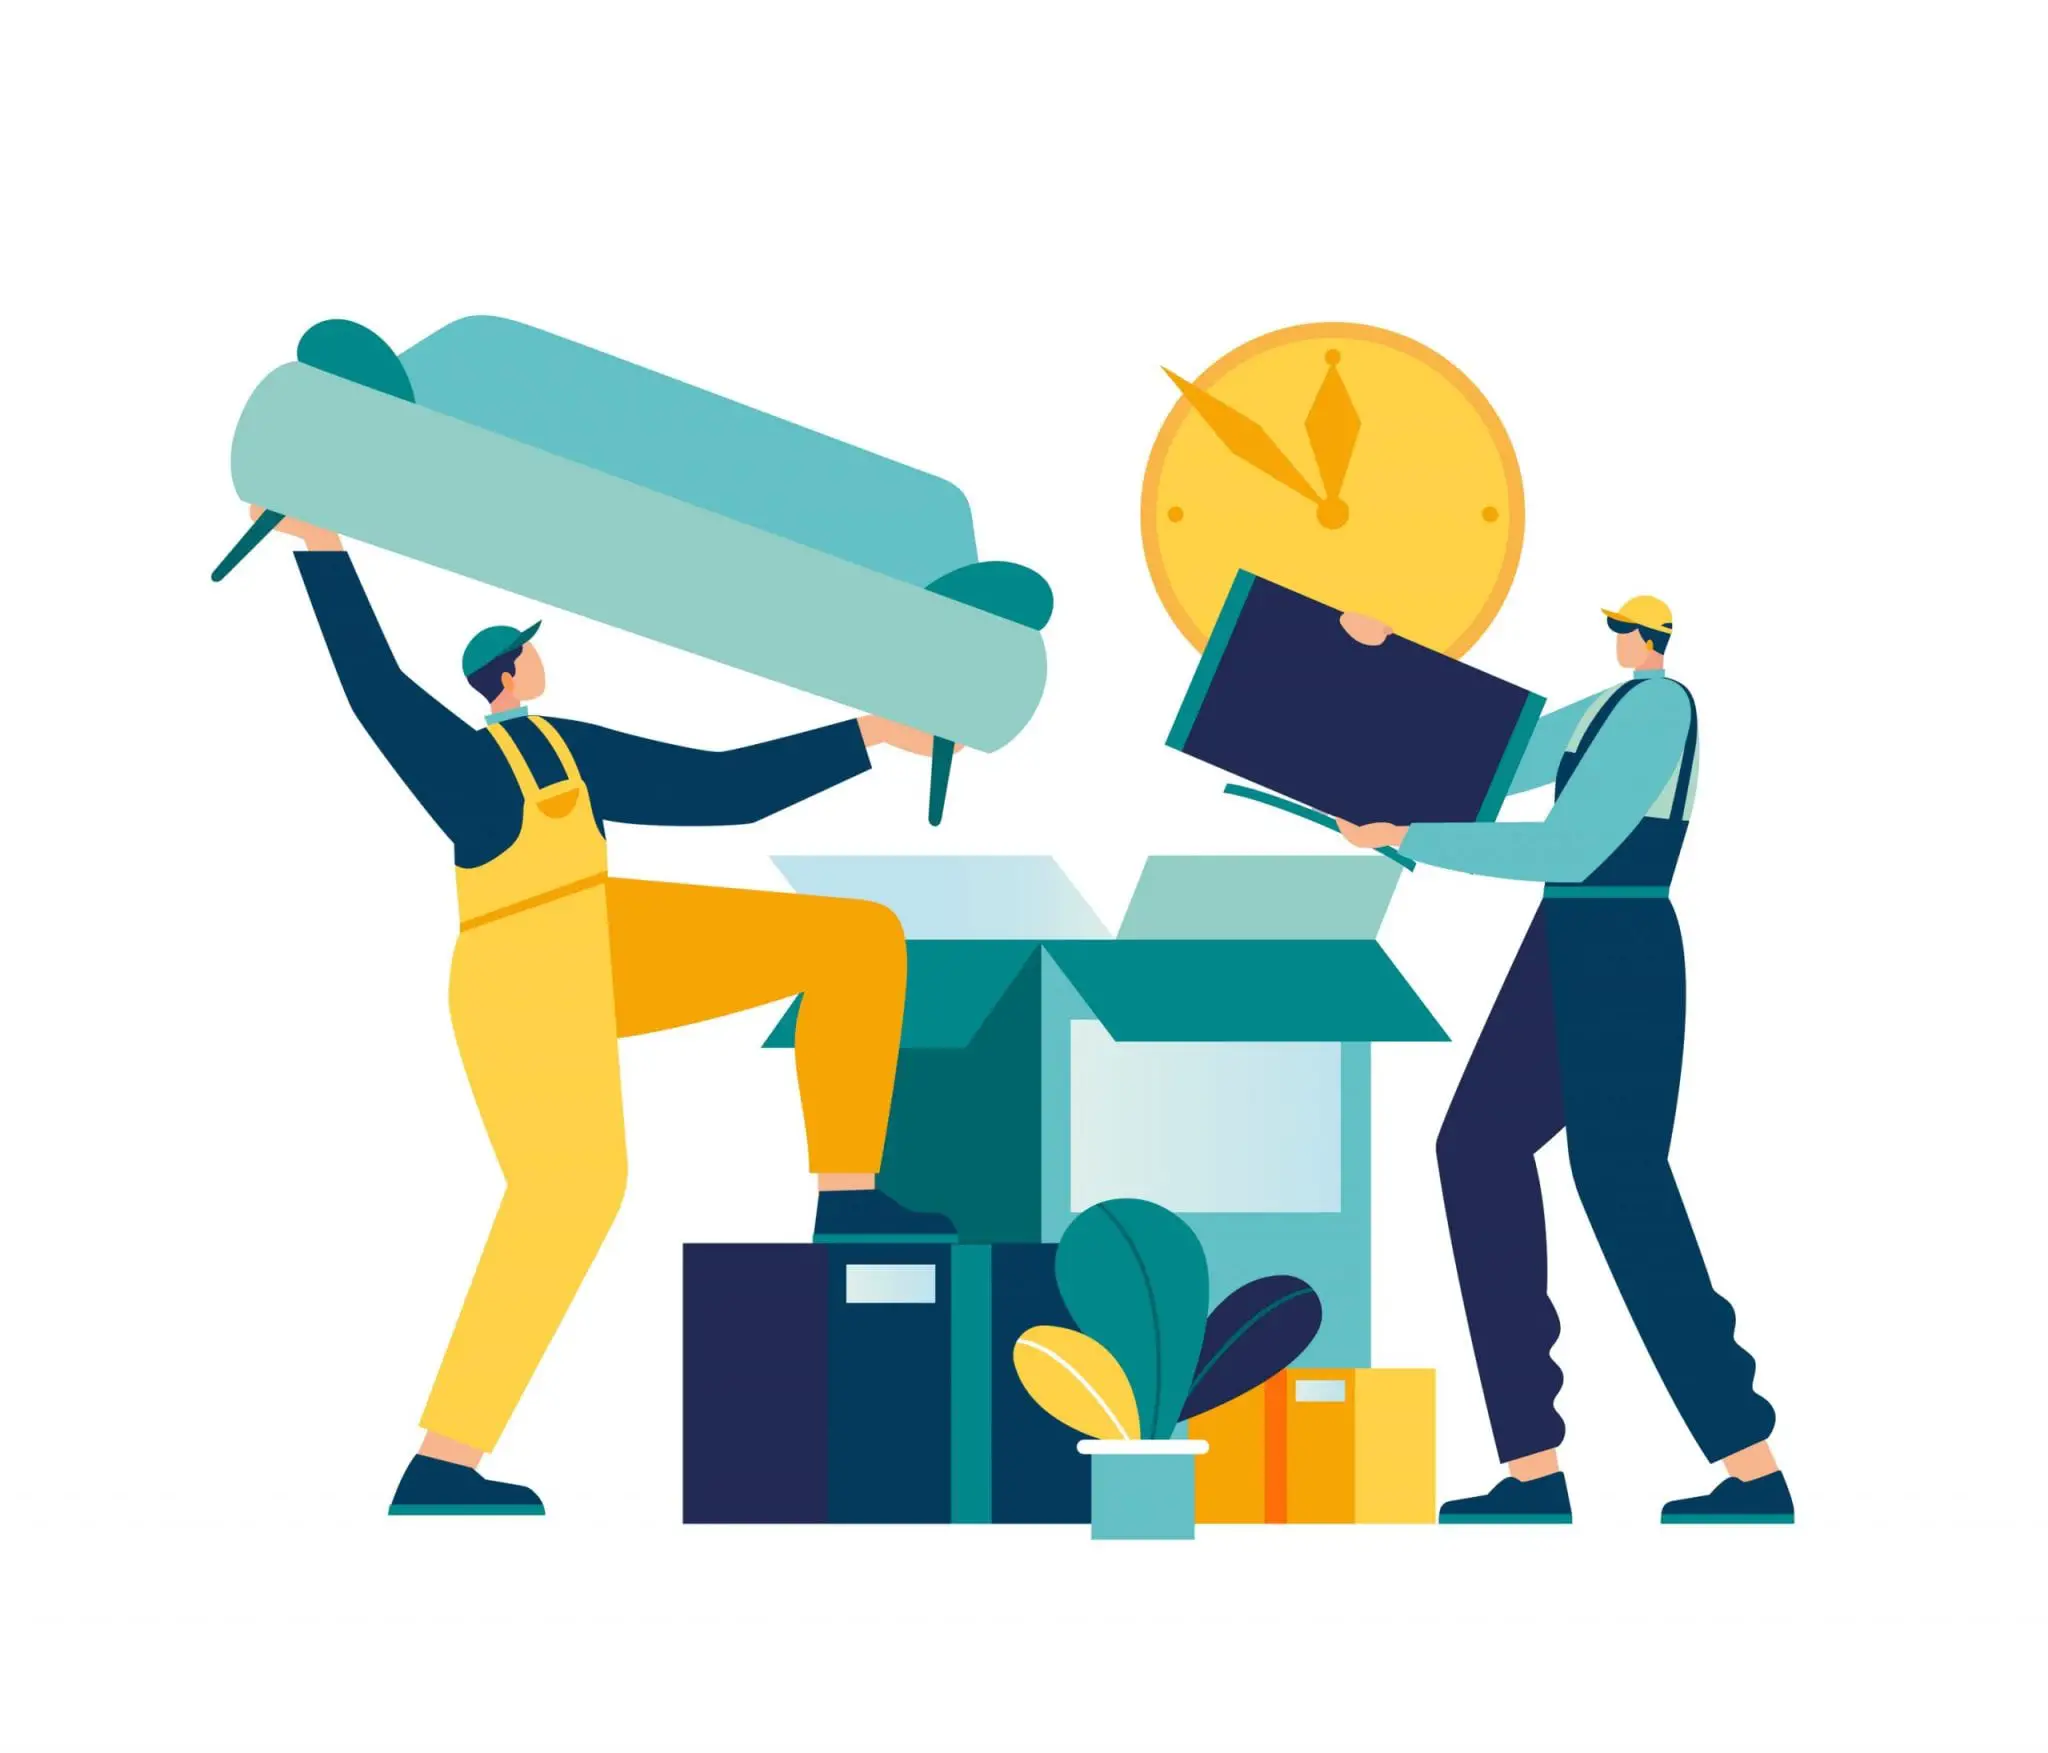 Vector Illustration of Service for Moving and Transporting Things and Objects. Vector Hypertrophied Flat People Pack and Transport Furniture to a New Place